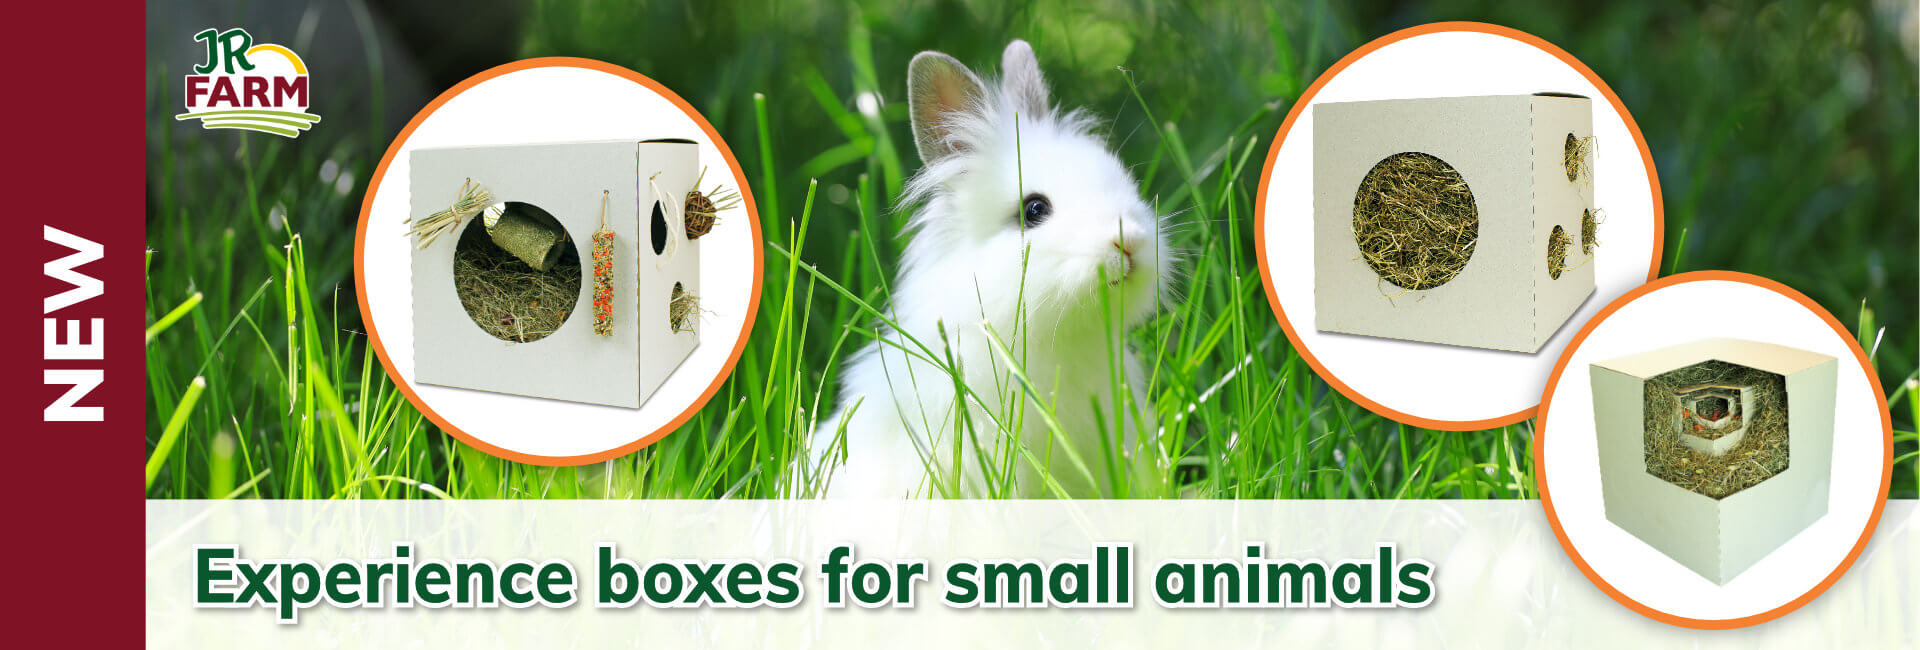 JR Farm Experience boxes for small animals